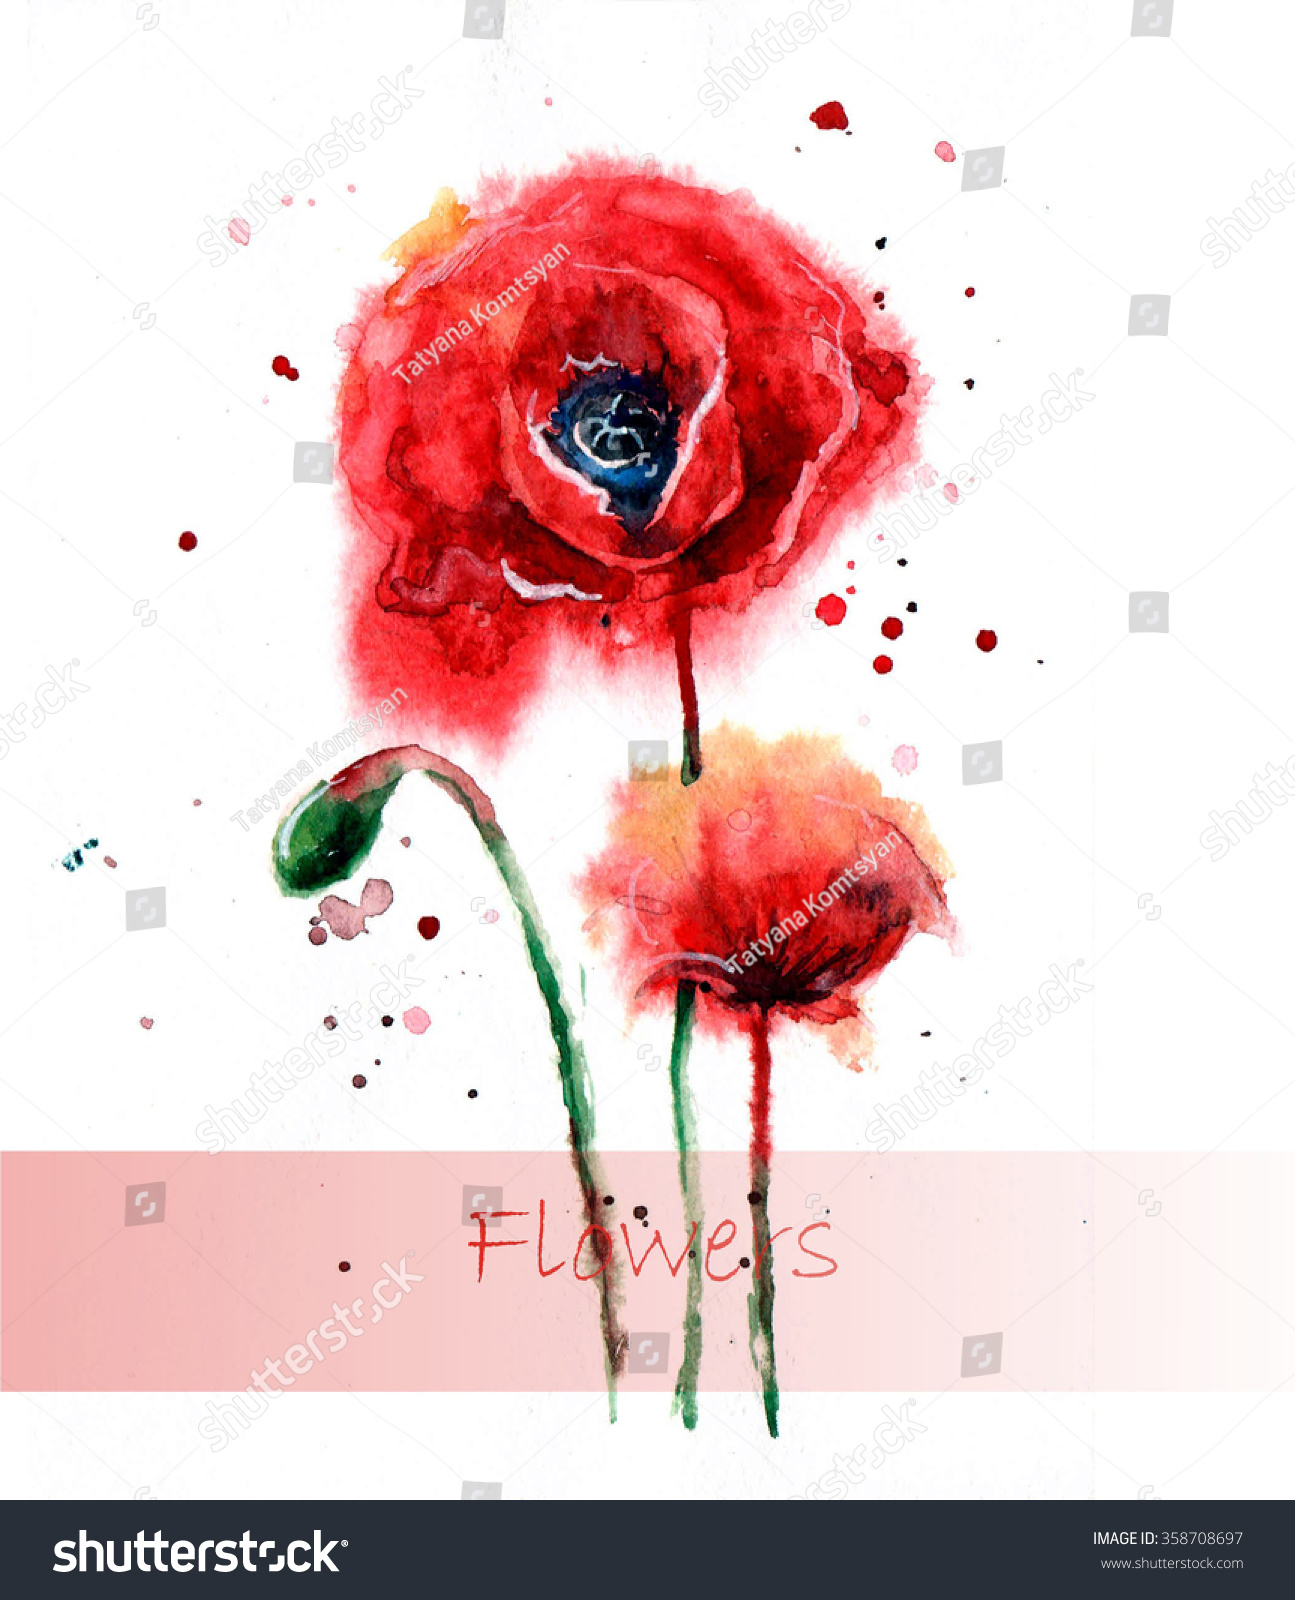 Beautiful Poppy flowers, Watercolor painting Isolated on white background.n Beauty print. flower sketch #358708697